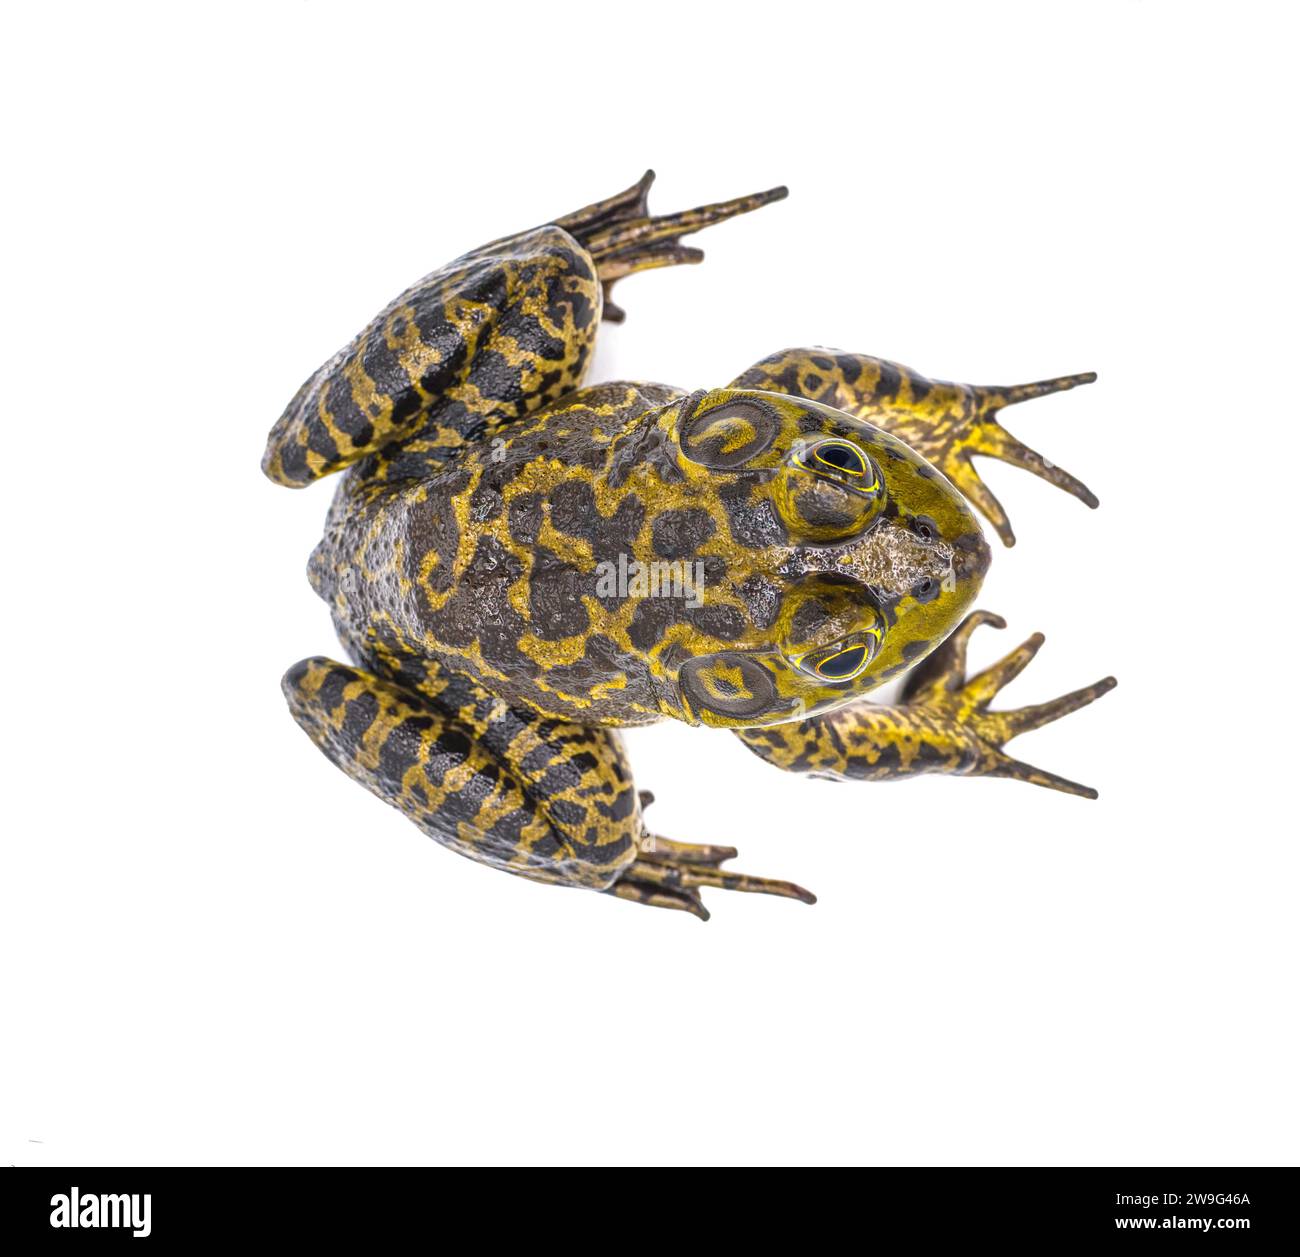 American bullfrog - Lithobates or Rana catesbeianus - view from dorsal above, isolated on white background Stock Photo